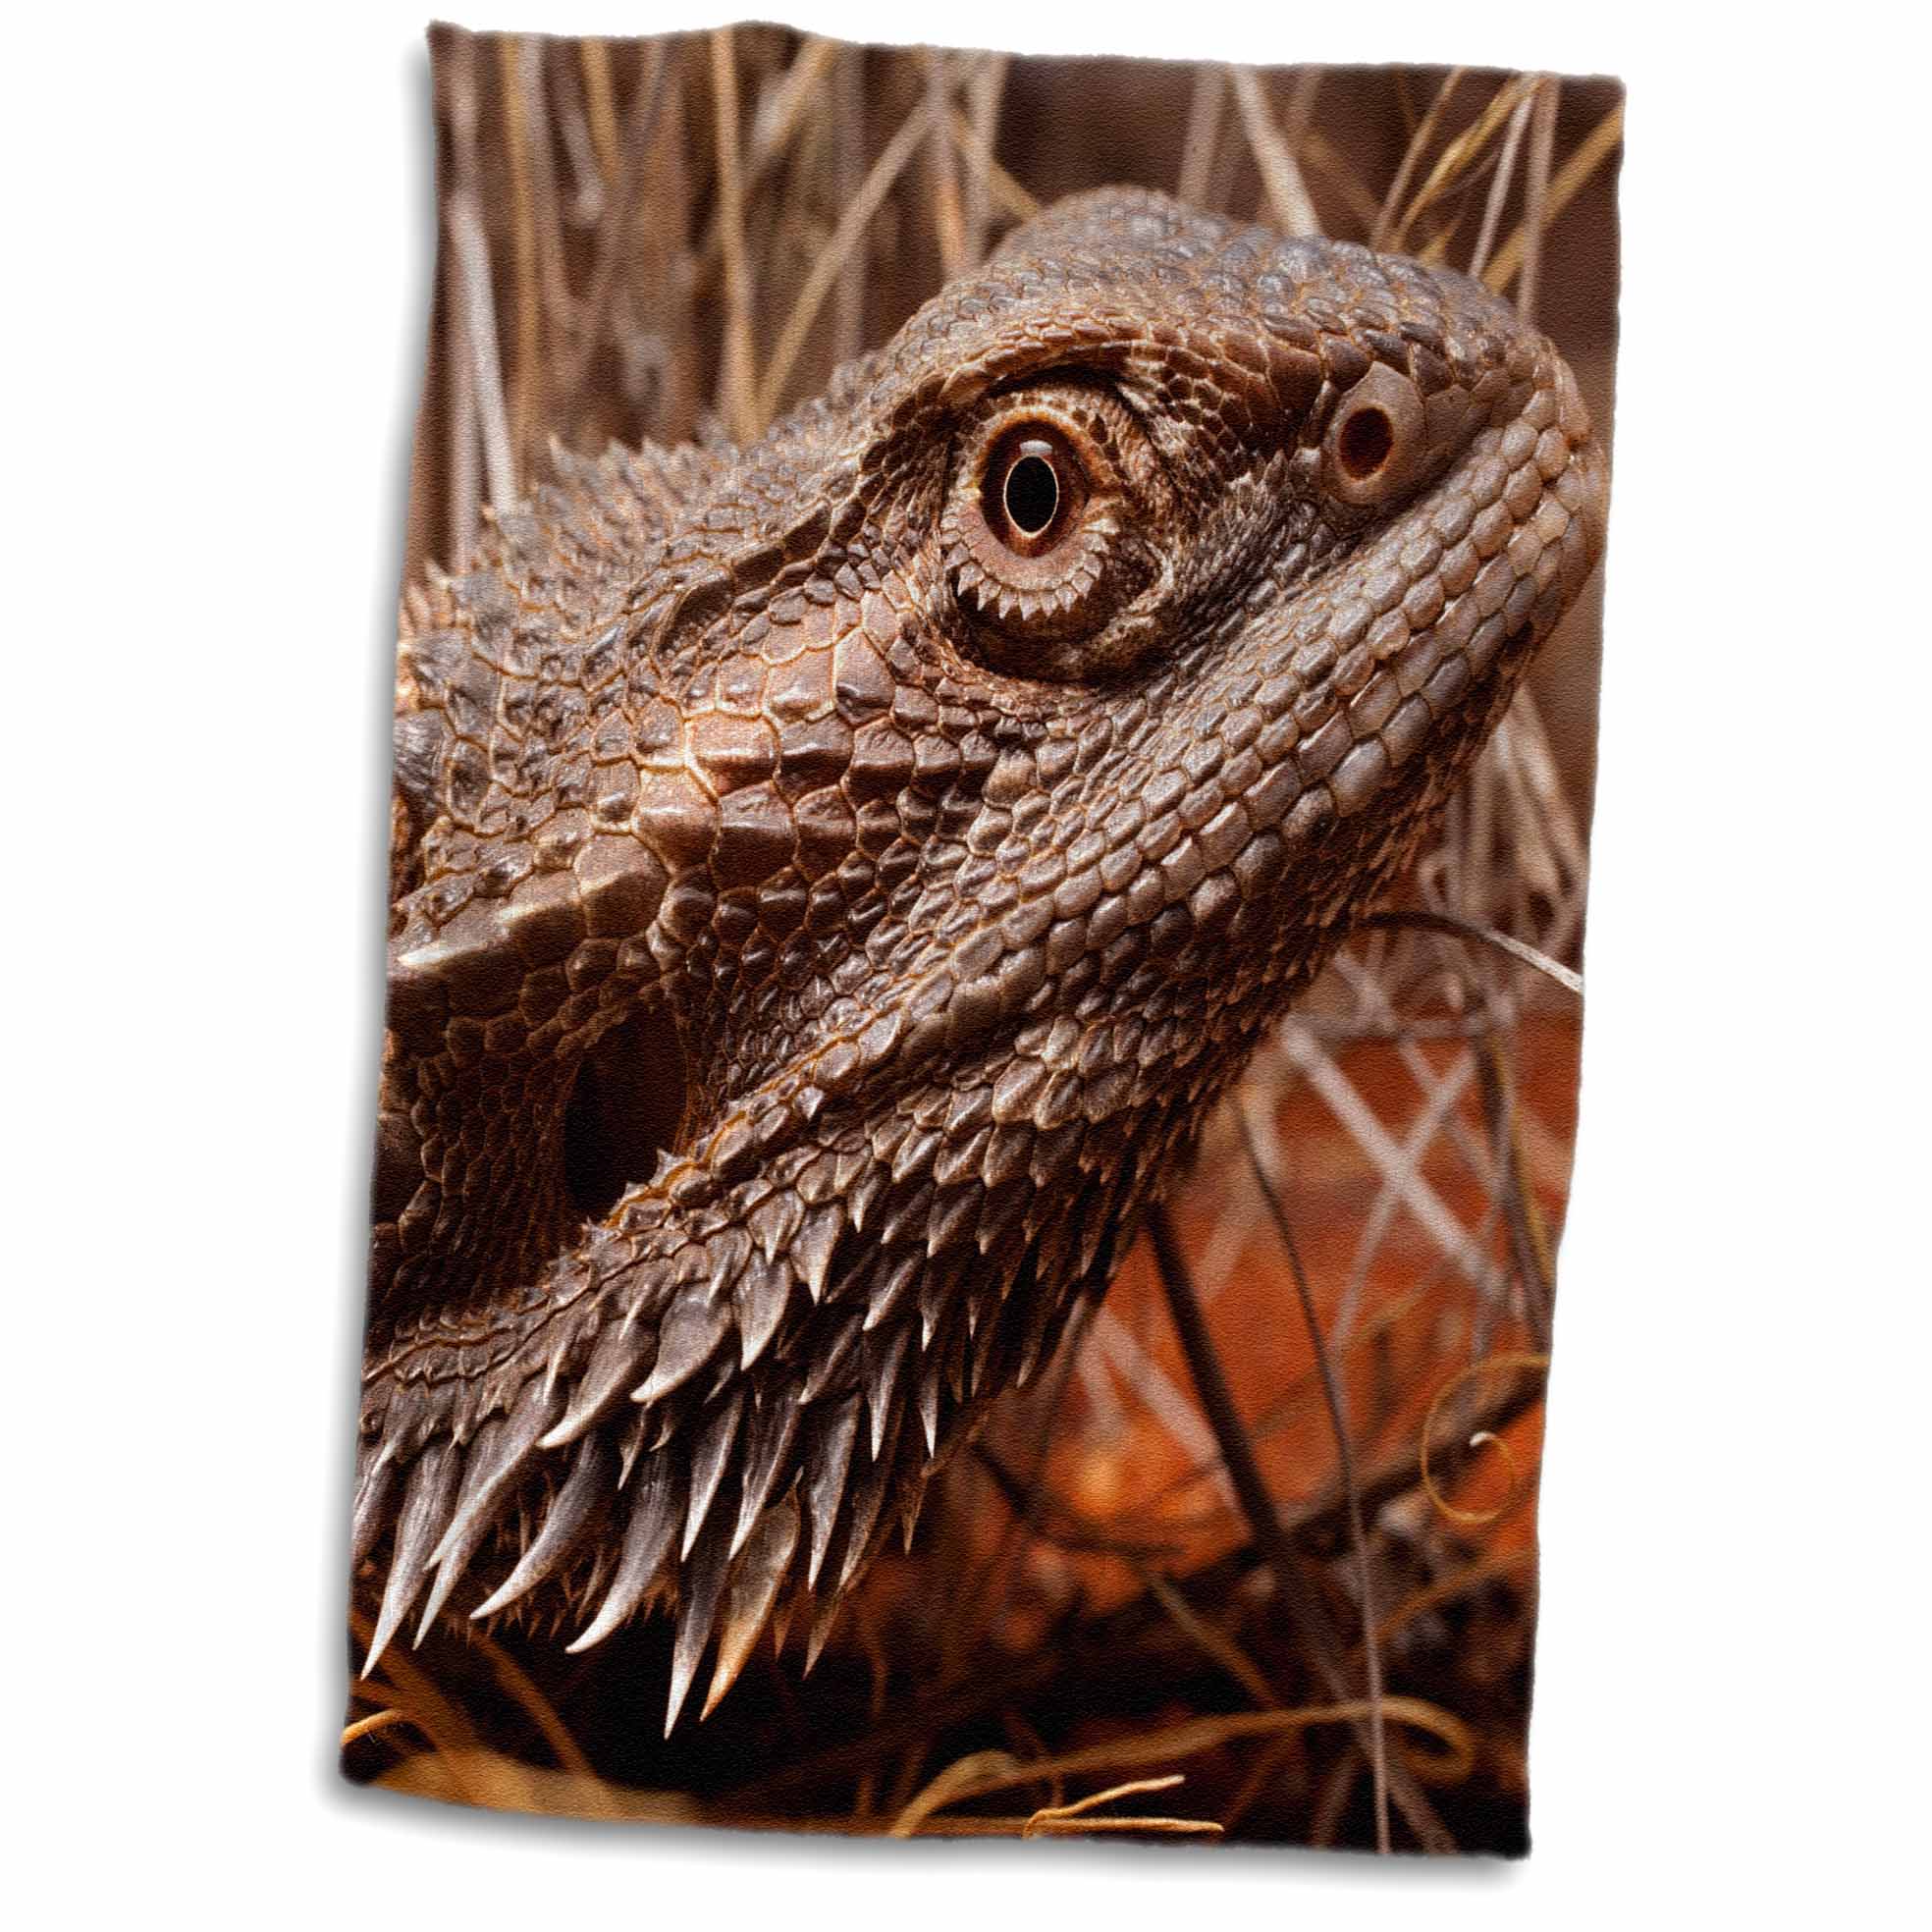 3dRose Australia, Central Bearded Dragon lizard, outback-AU01 PSO0064 - Paul Souders - Towel, 15 by 22-inch - image 1 of 1